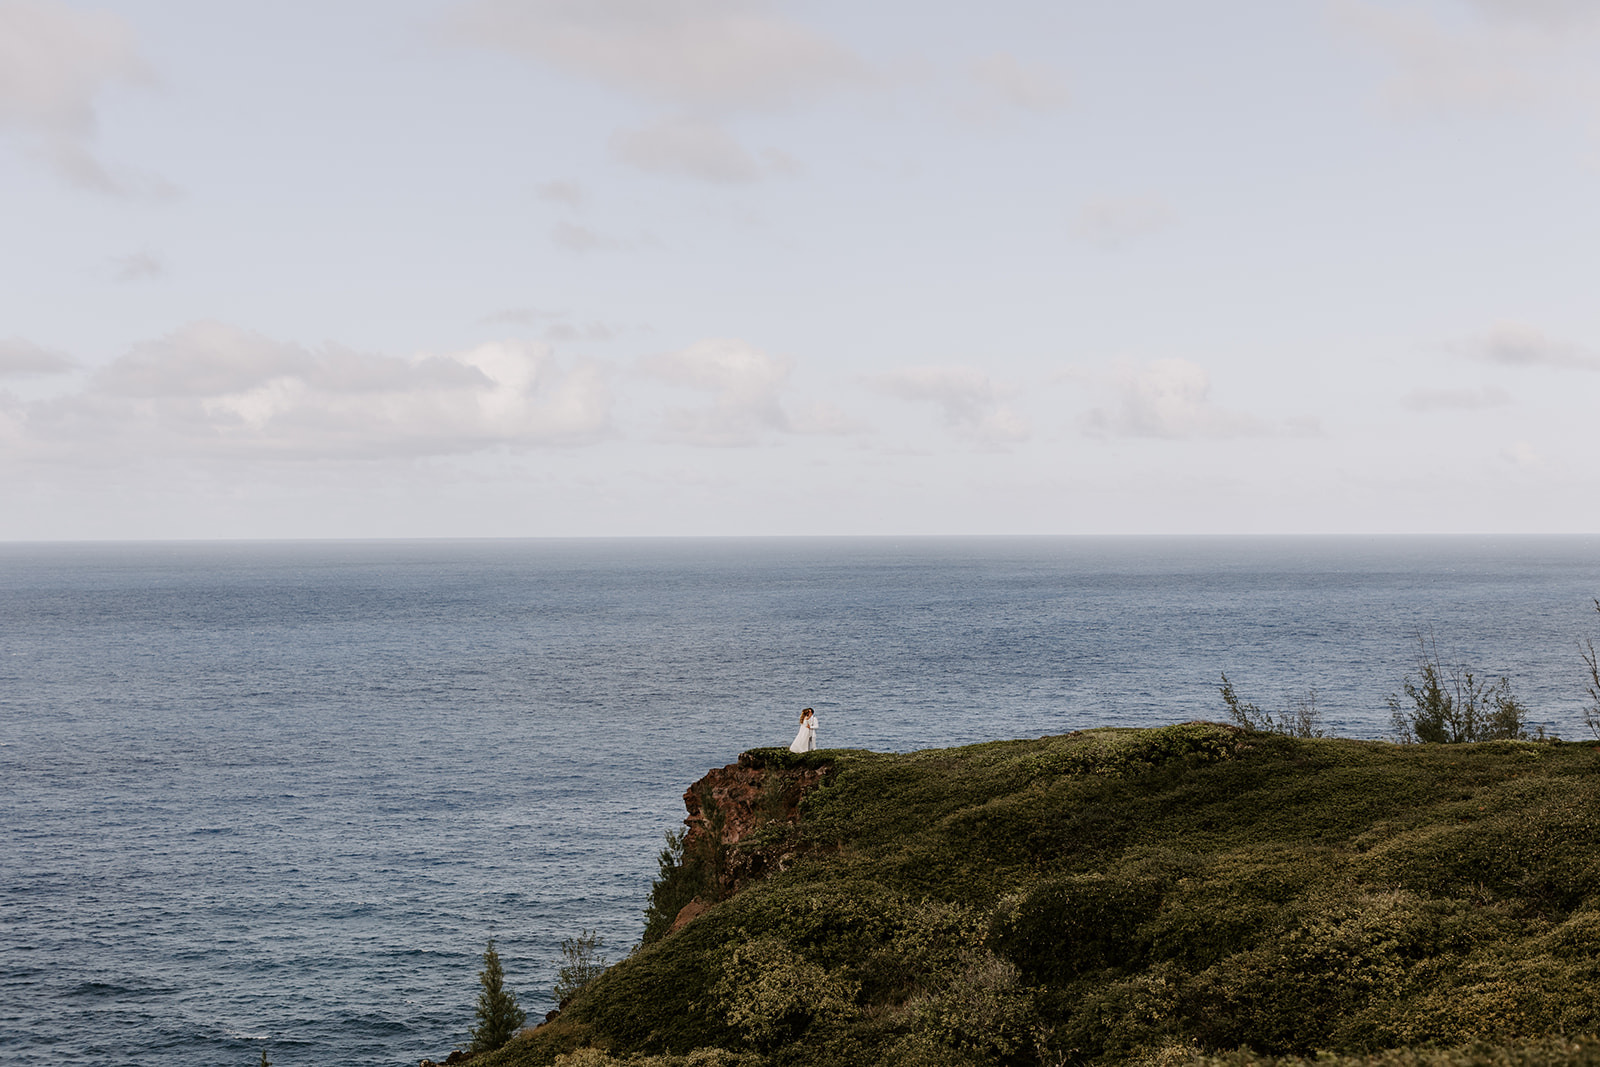 A couple who had a Maui elopement say their vows during a Hawaii cliffside wedding ceremony by the ocean 